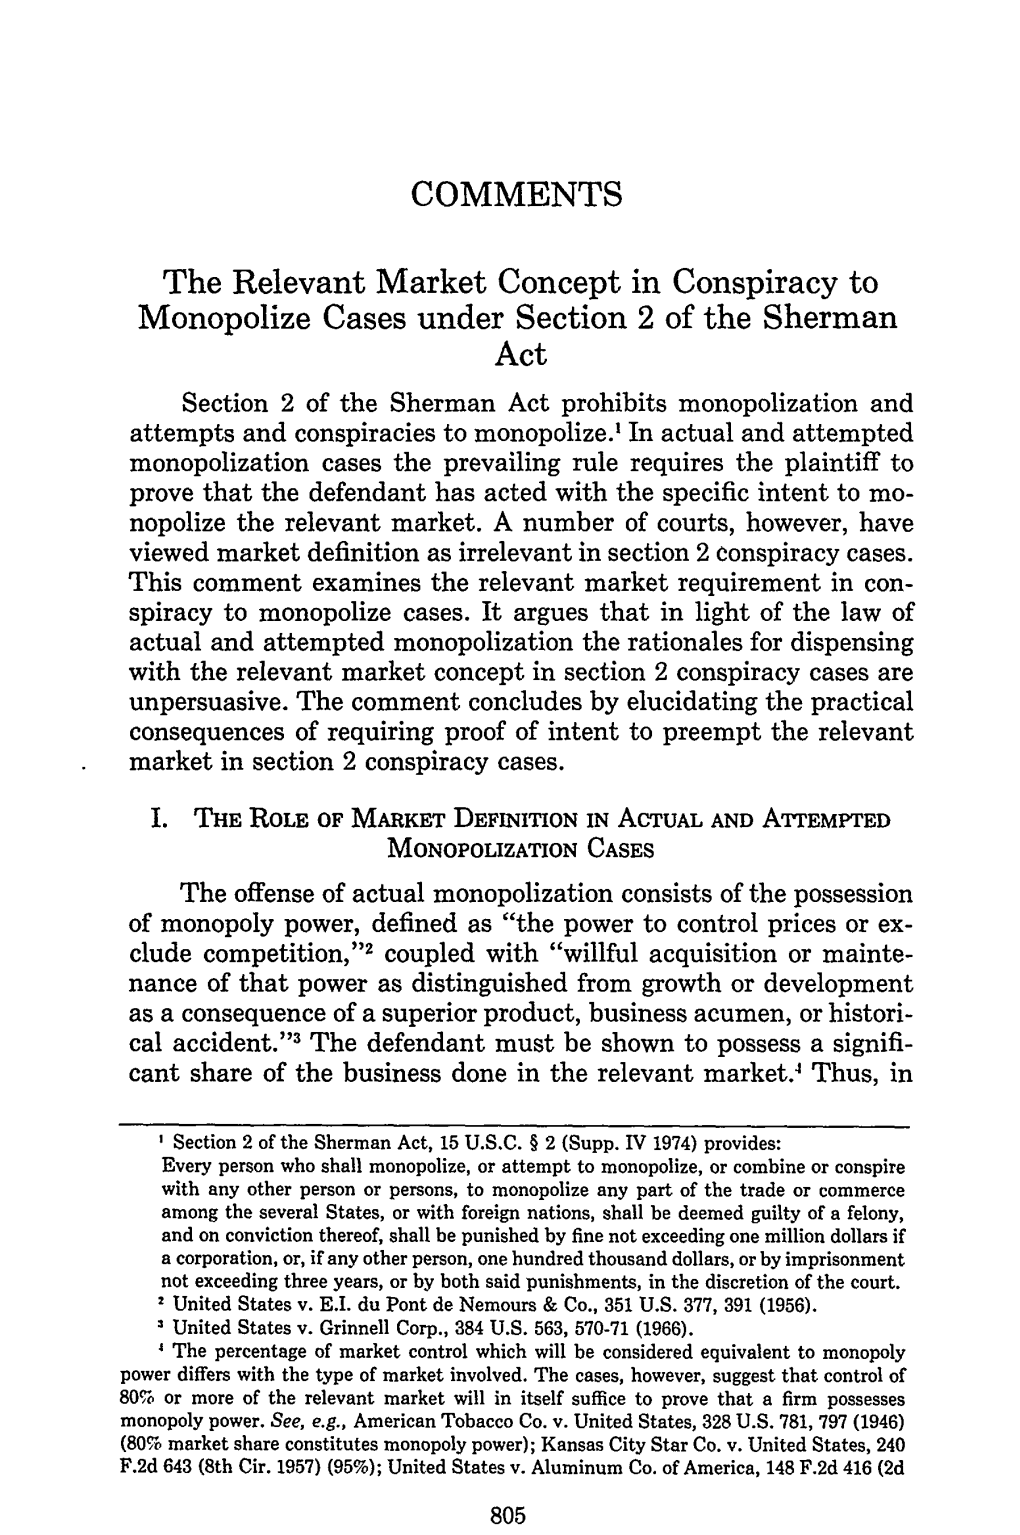 The Relevant Market Concept in Conspiracy to Monopolize Cases